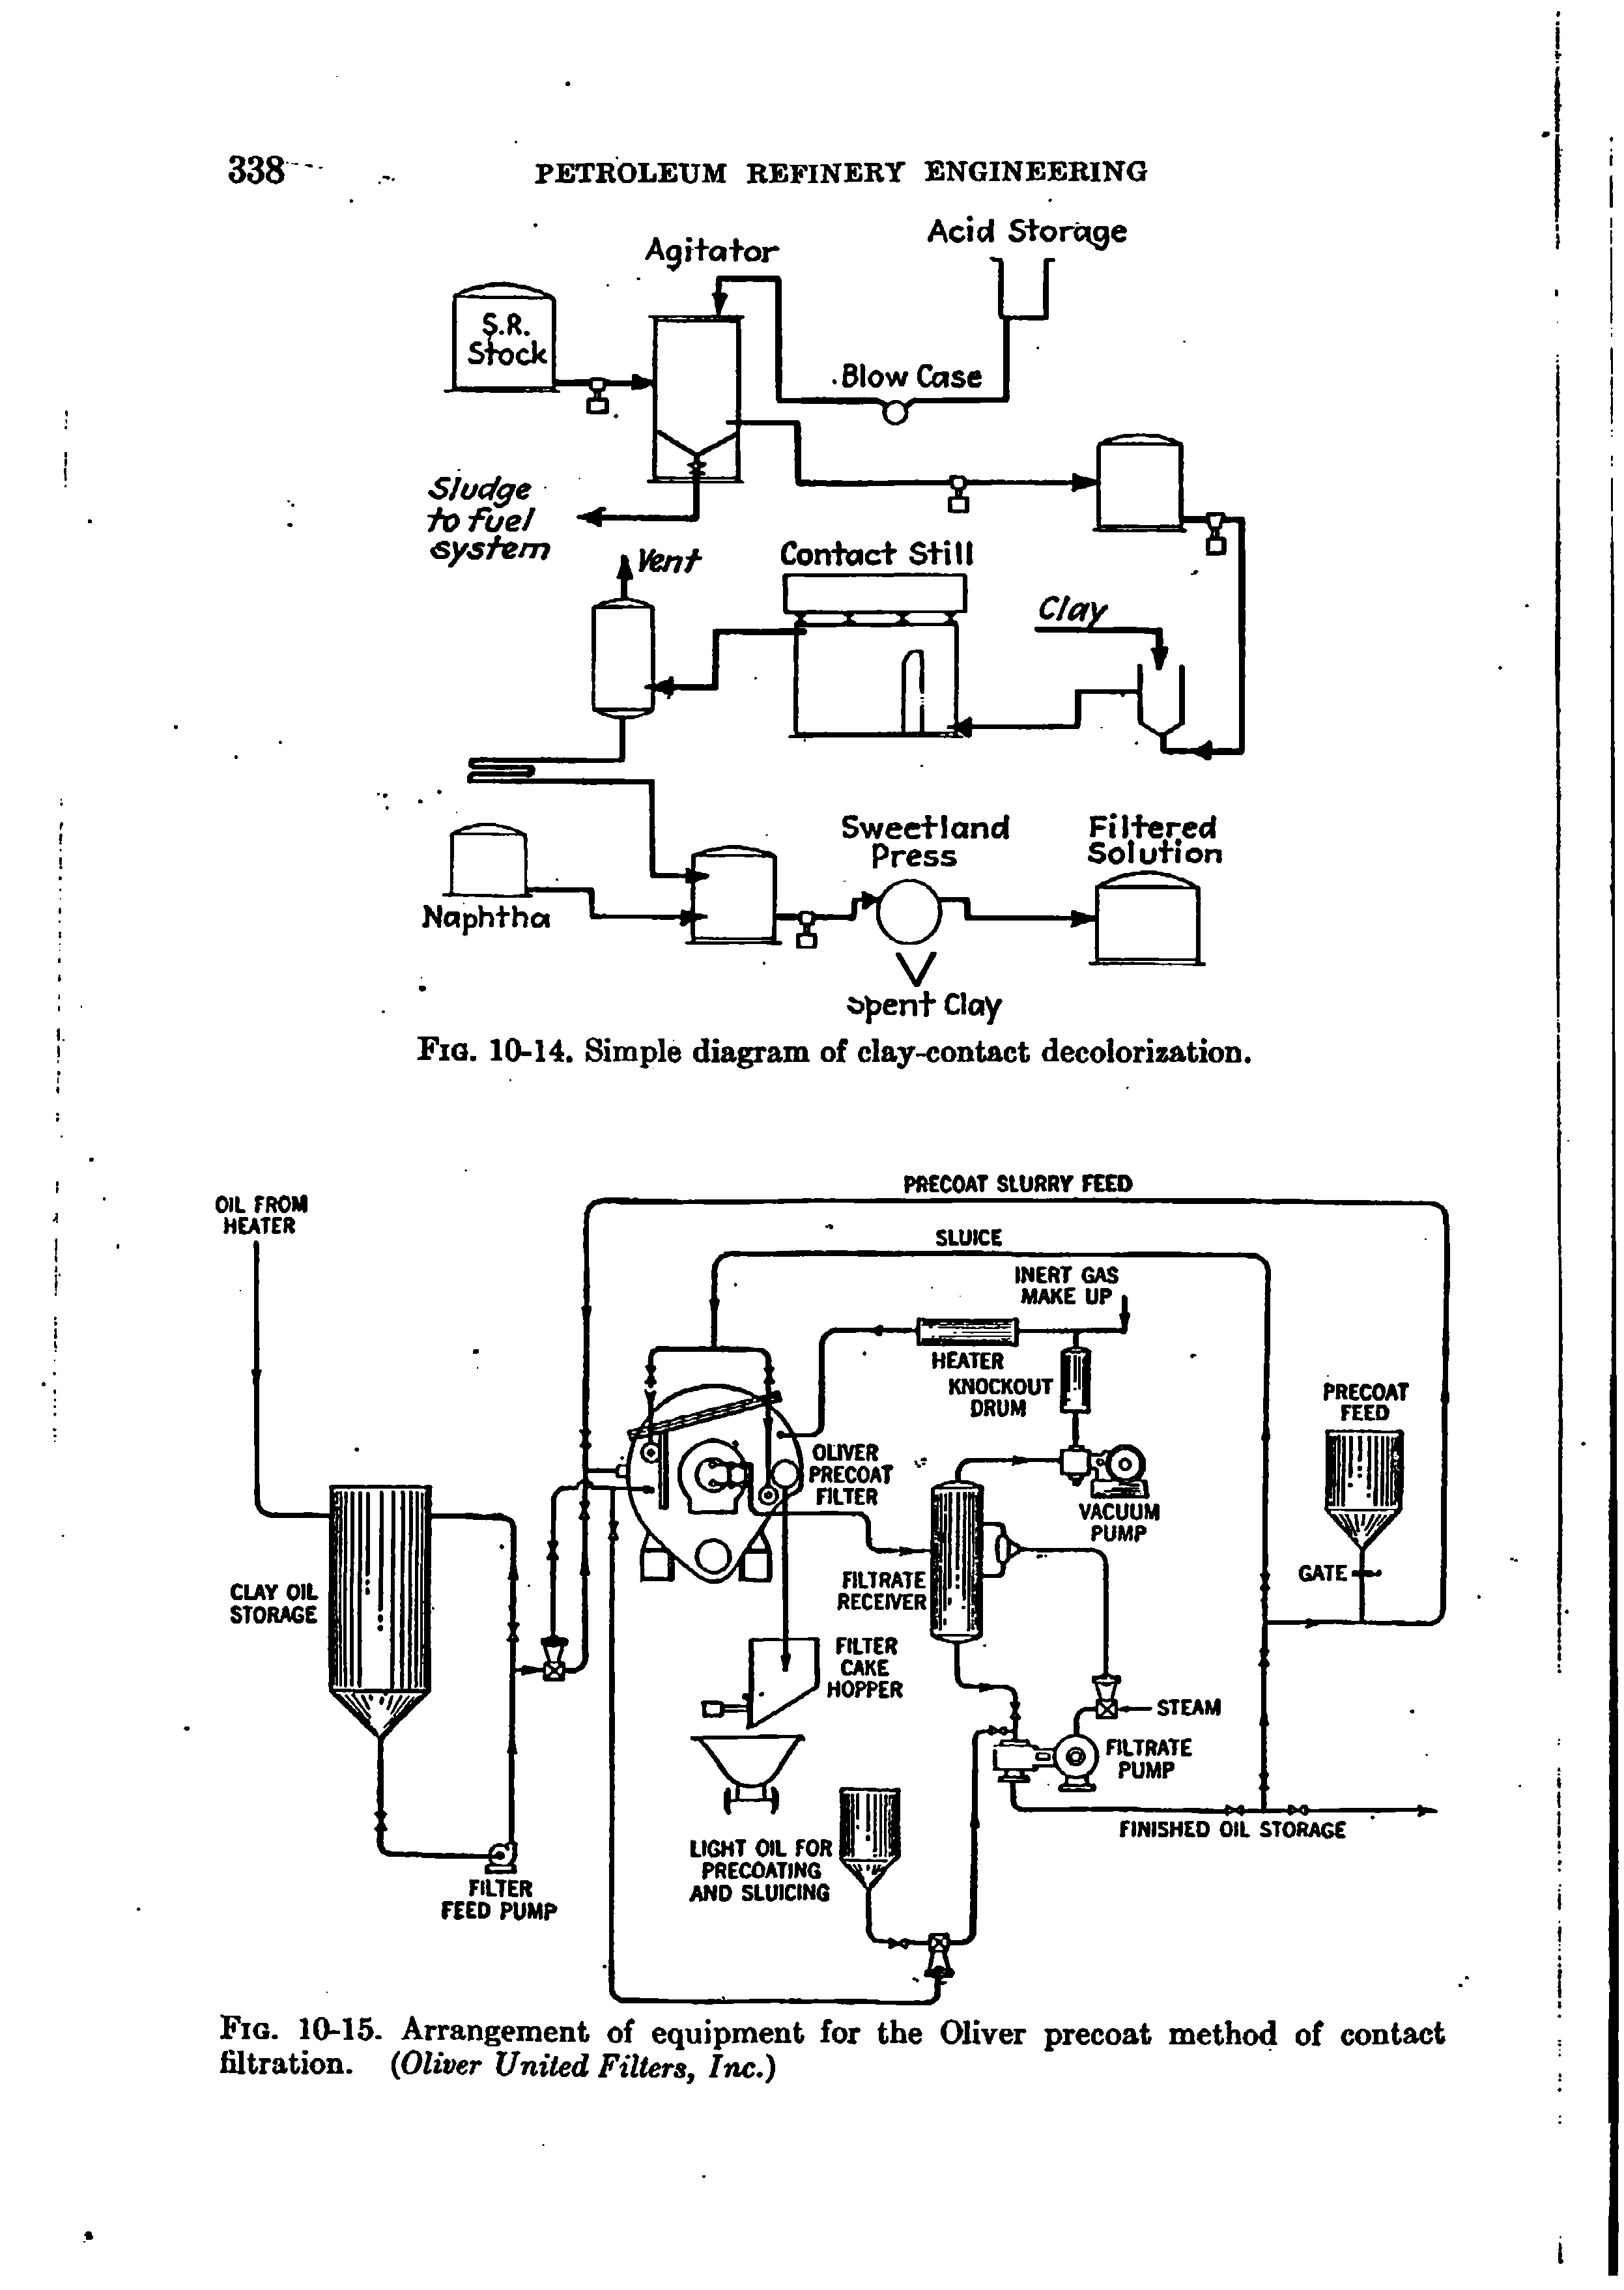 Fig. 10-15. Arrangement of equipment for the Oliver precoat method of contact filtration. Oliver United Filters, Inc.)...